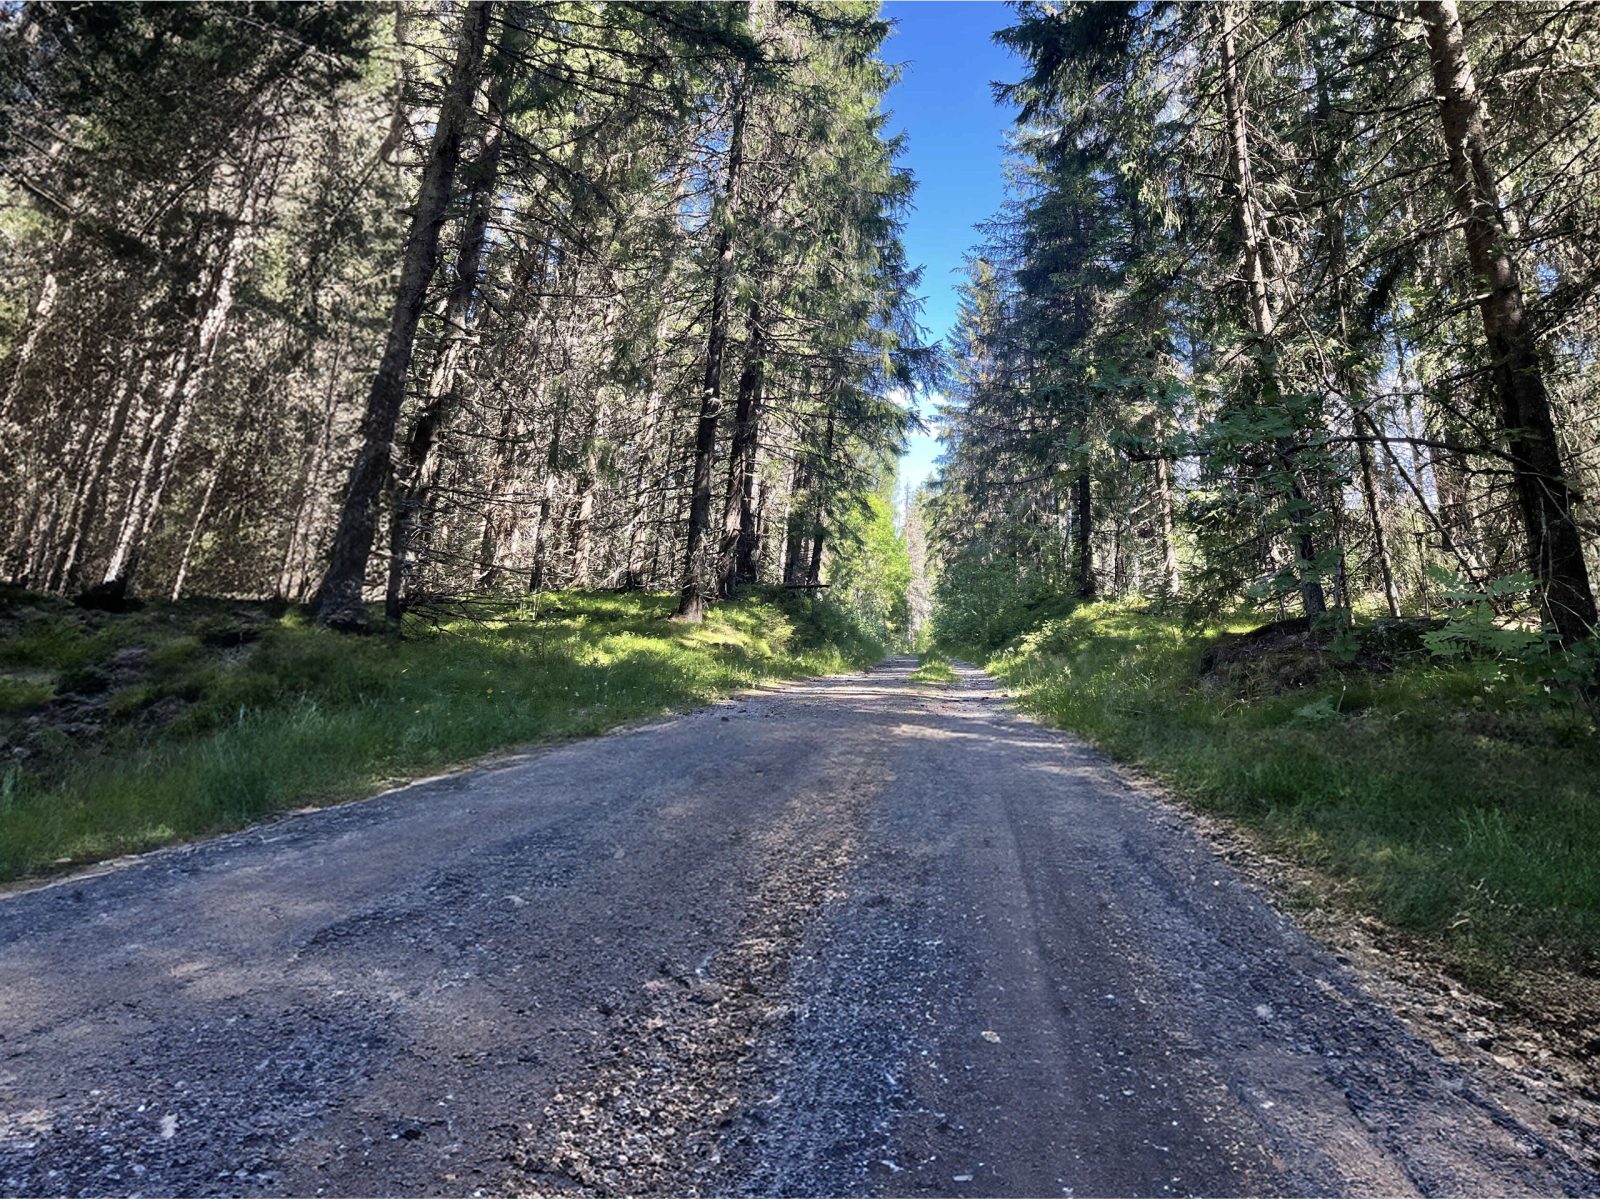 Historical Eidsvoll and Vast Forests on Gravel Roads